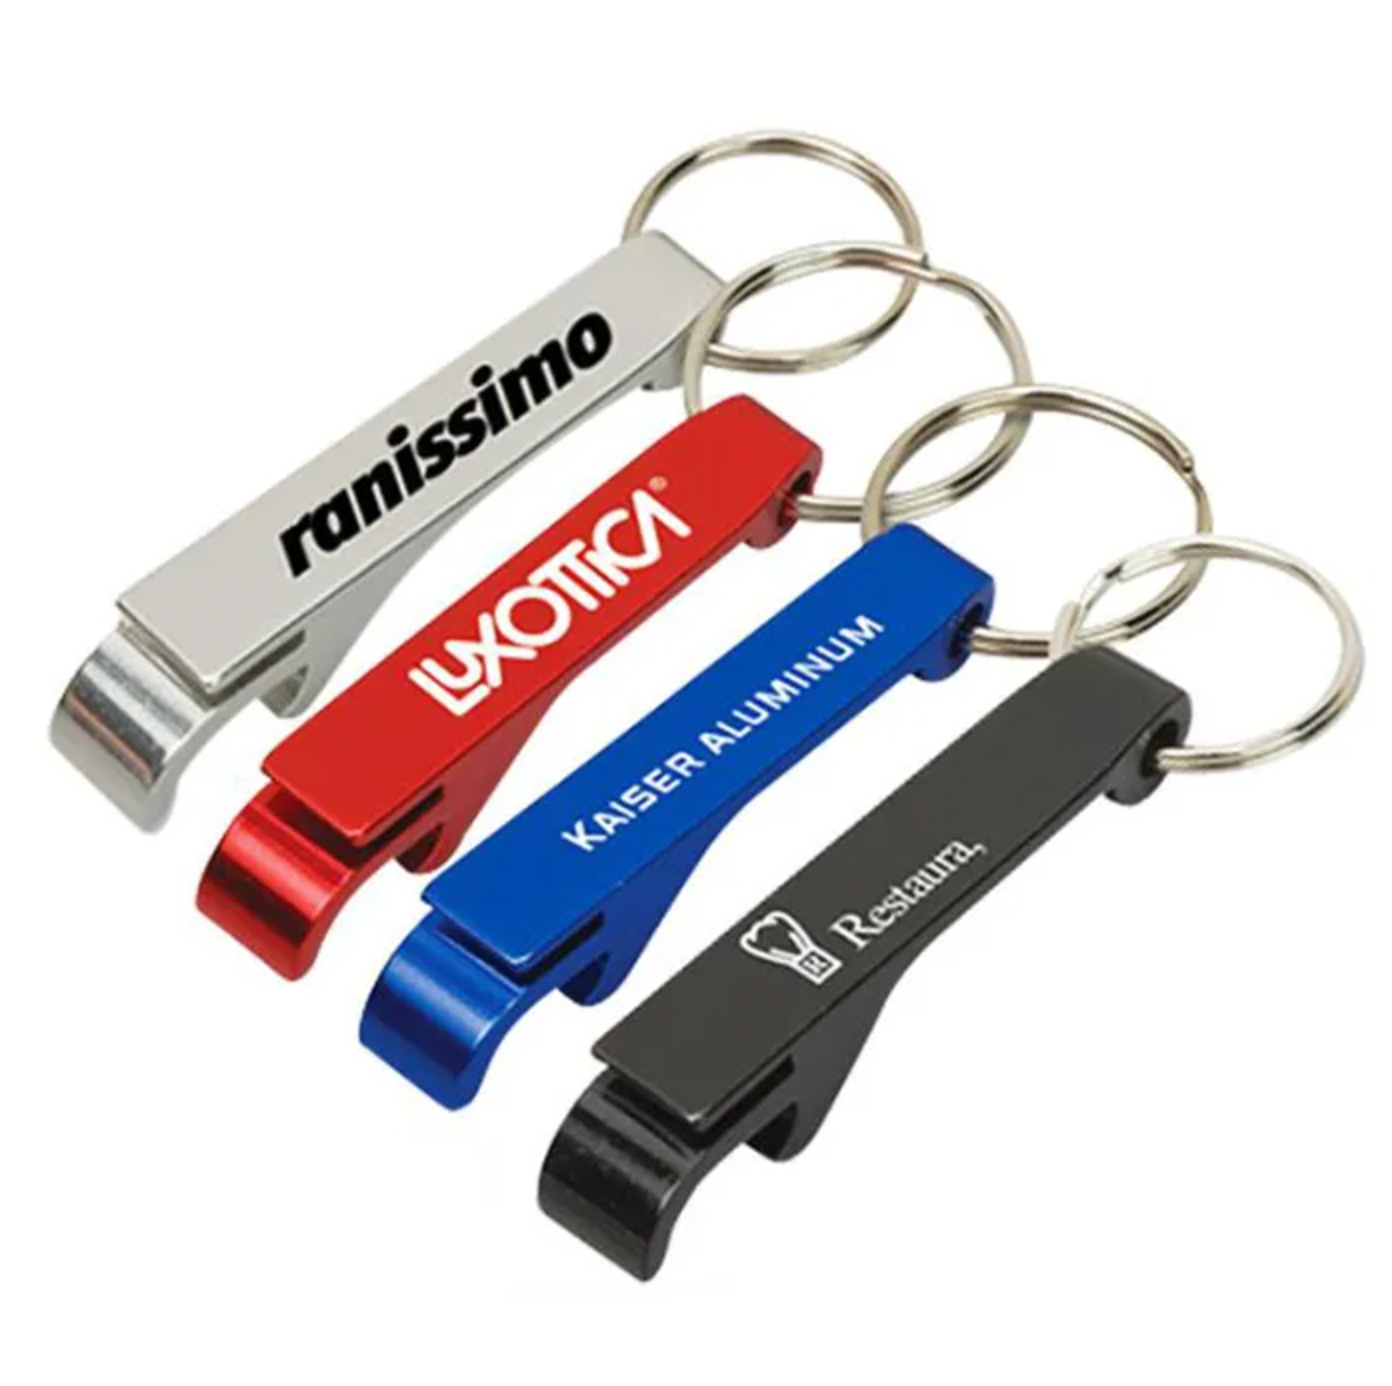 CU-06 - Colorful Aluminum Bottle Opener with Key Chain